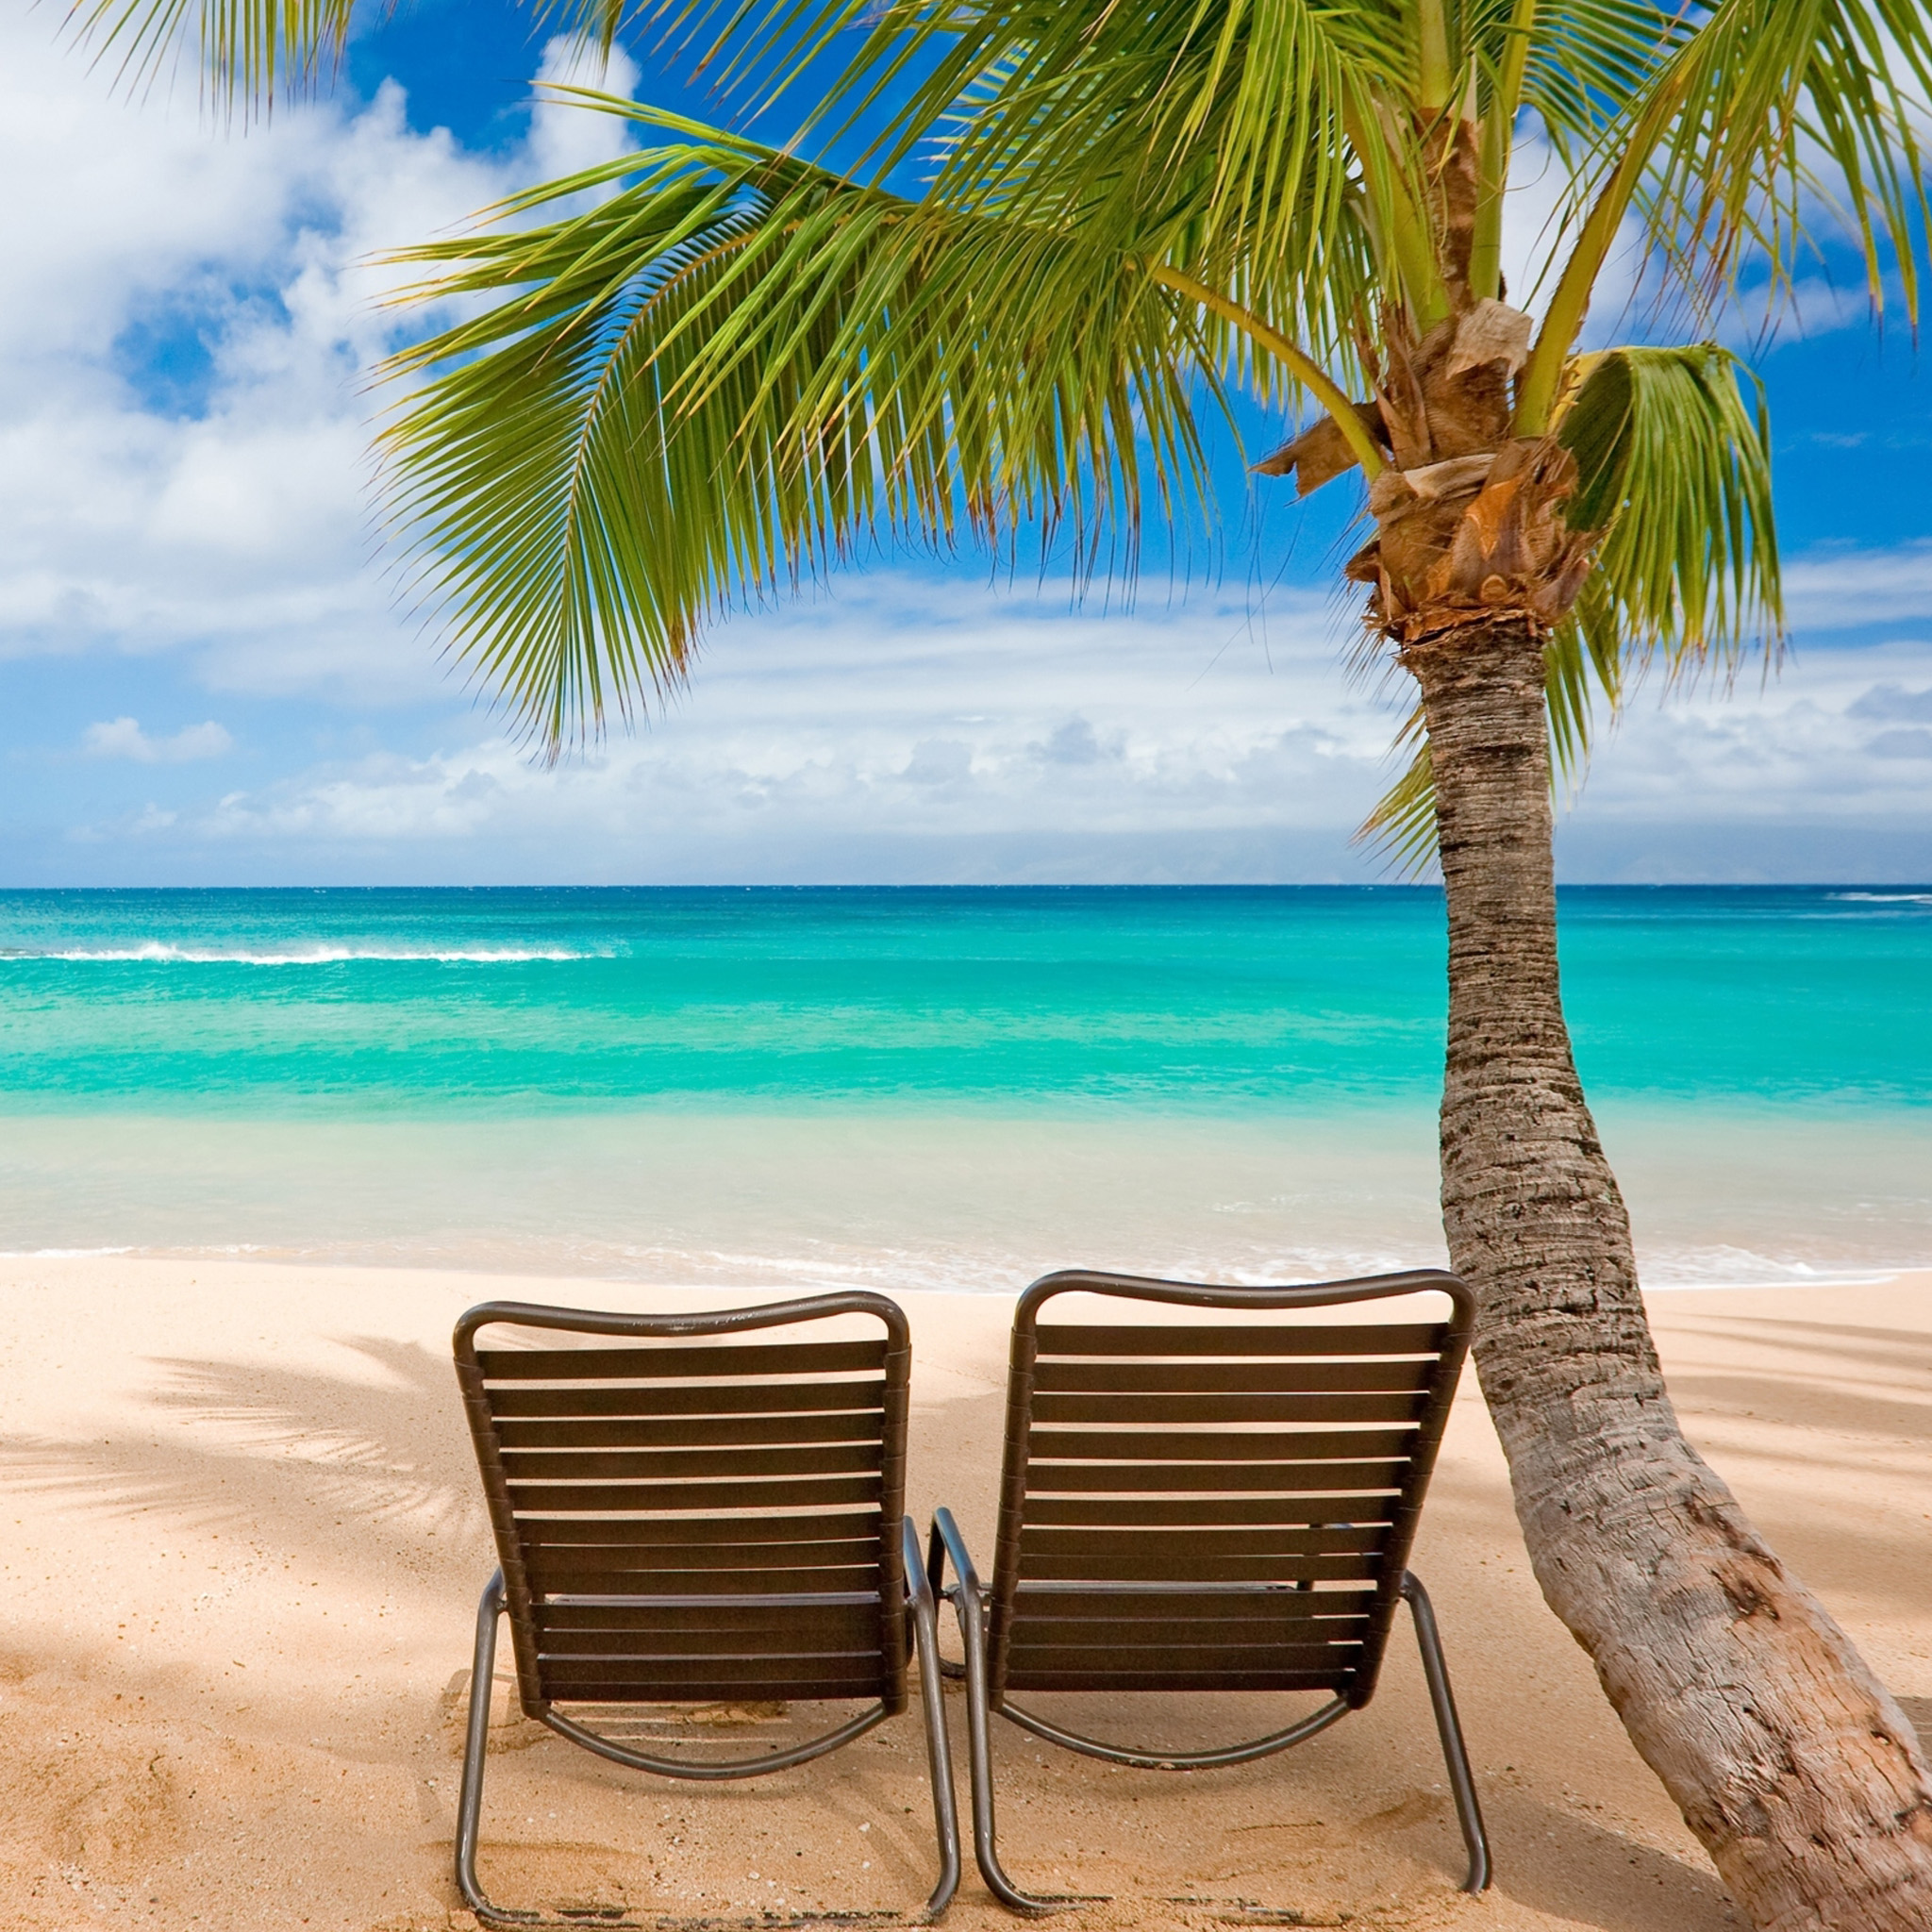 A Shady Spot On The Beach For Ipad, Iphone, And Apple - Beach Wallpapers For Ipad - HD Wallpaper 